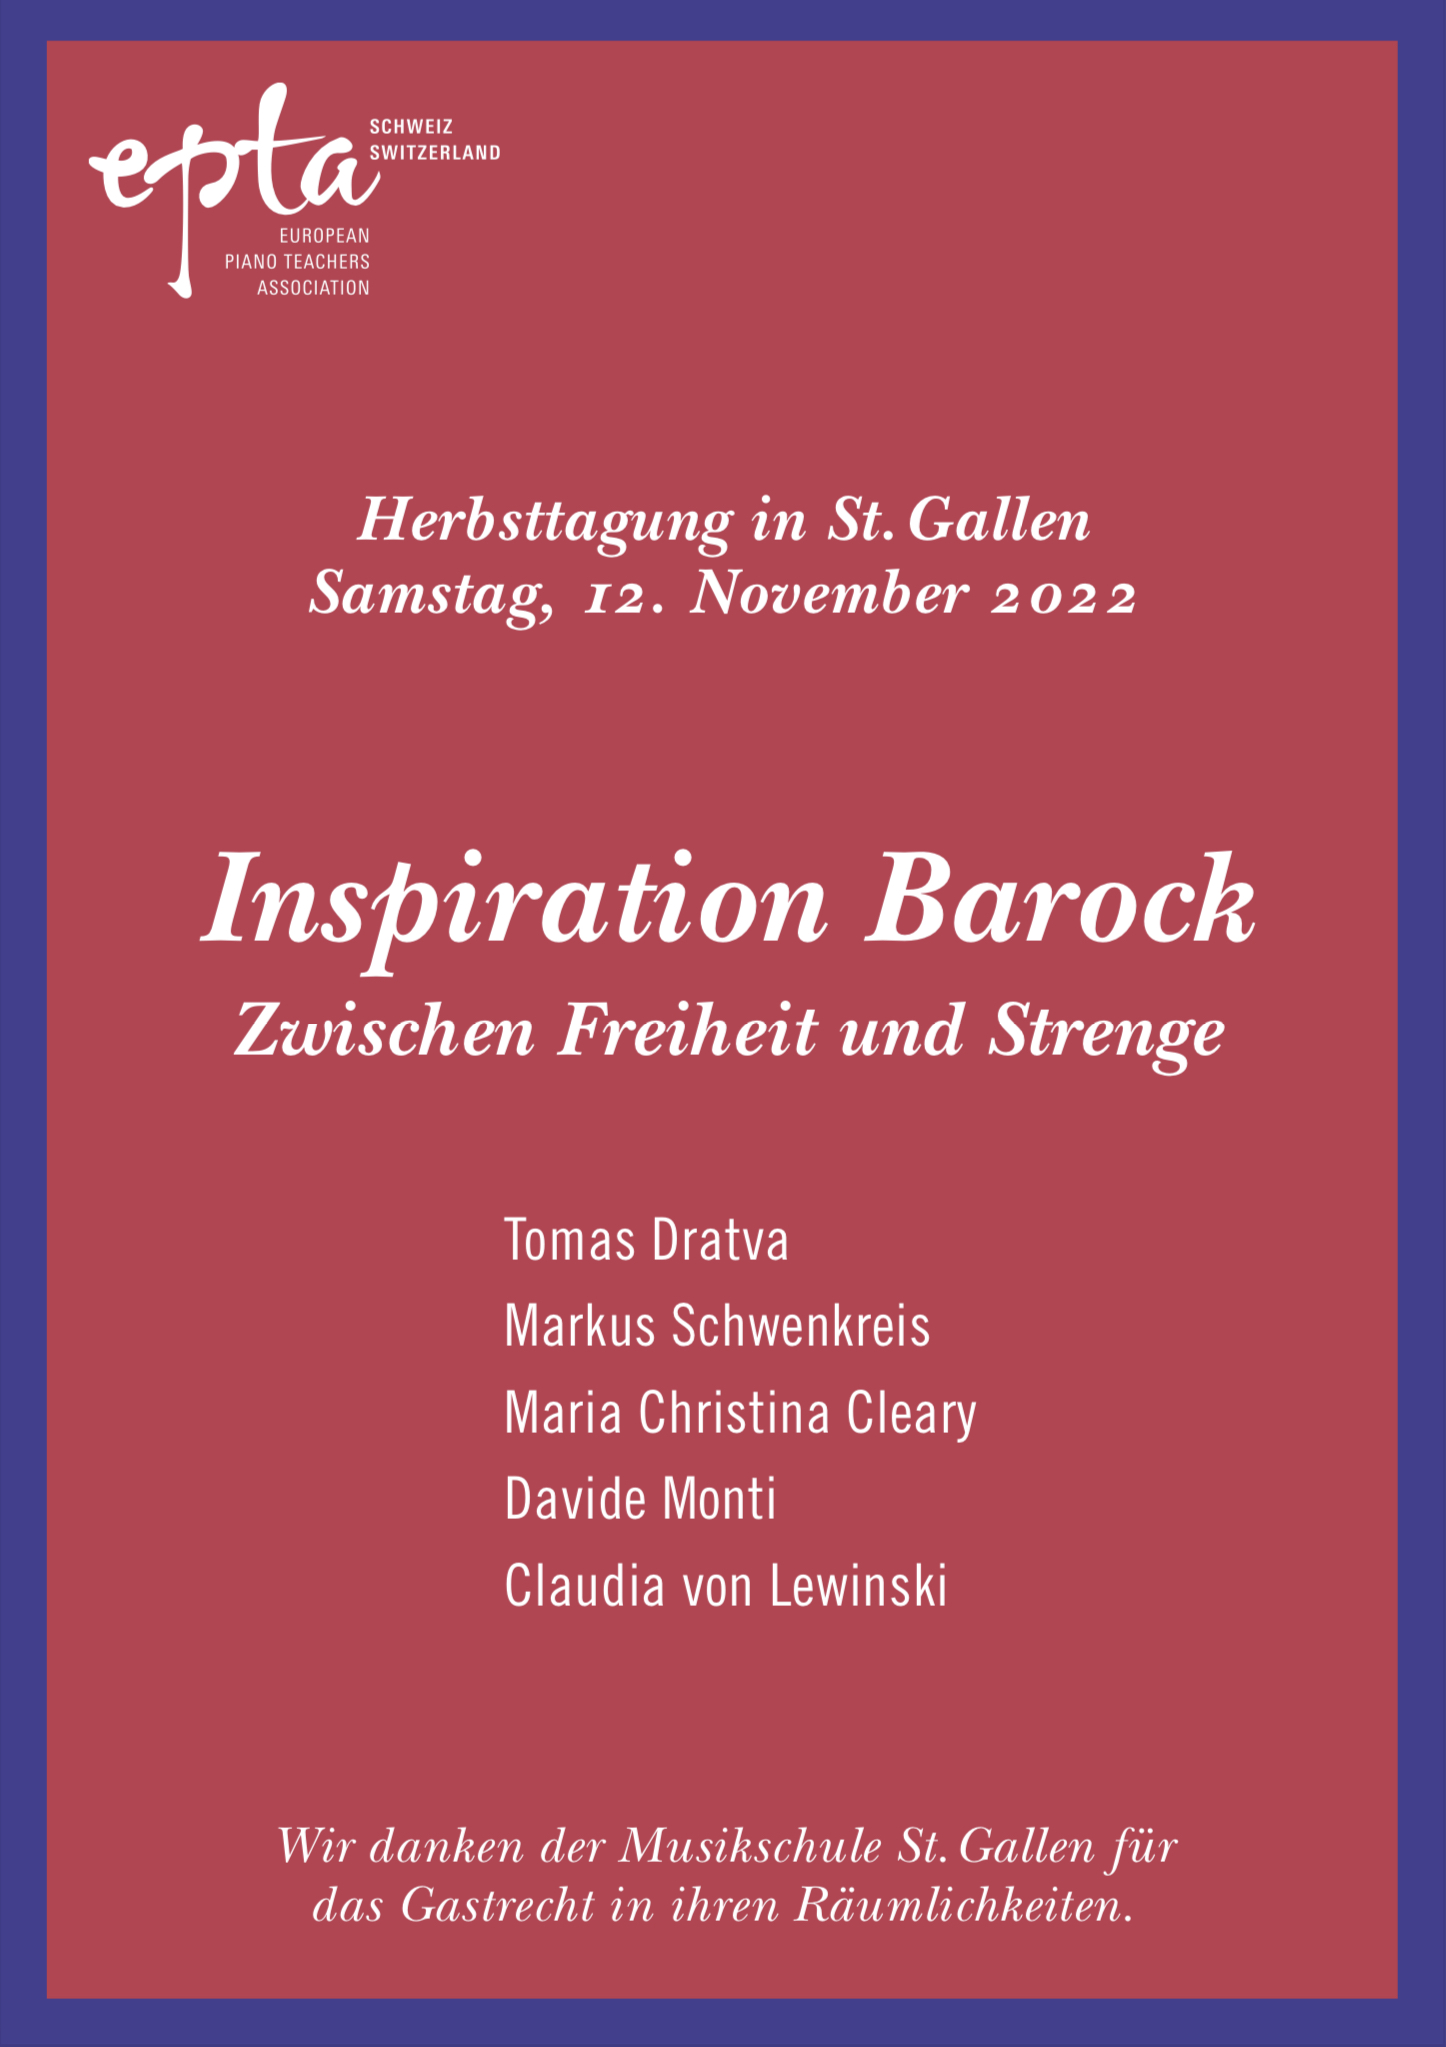 12112022 Flyer front